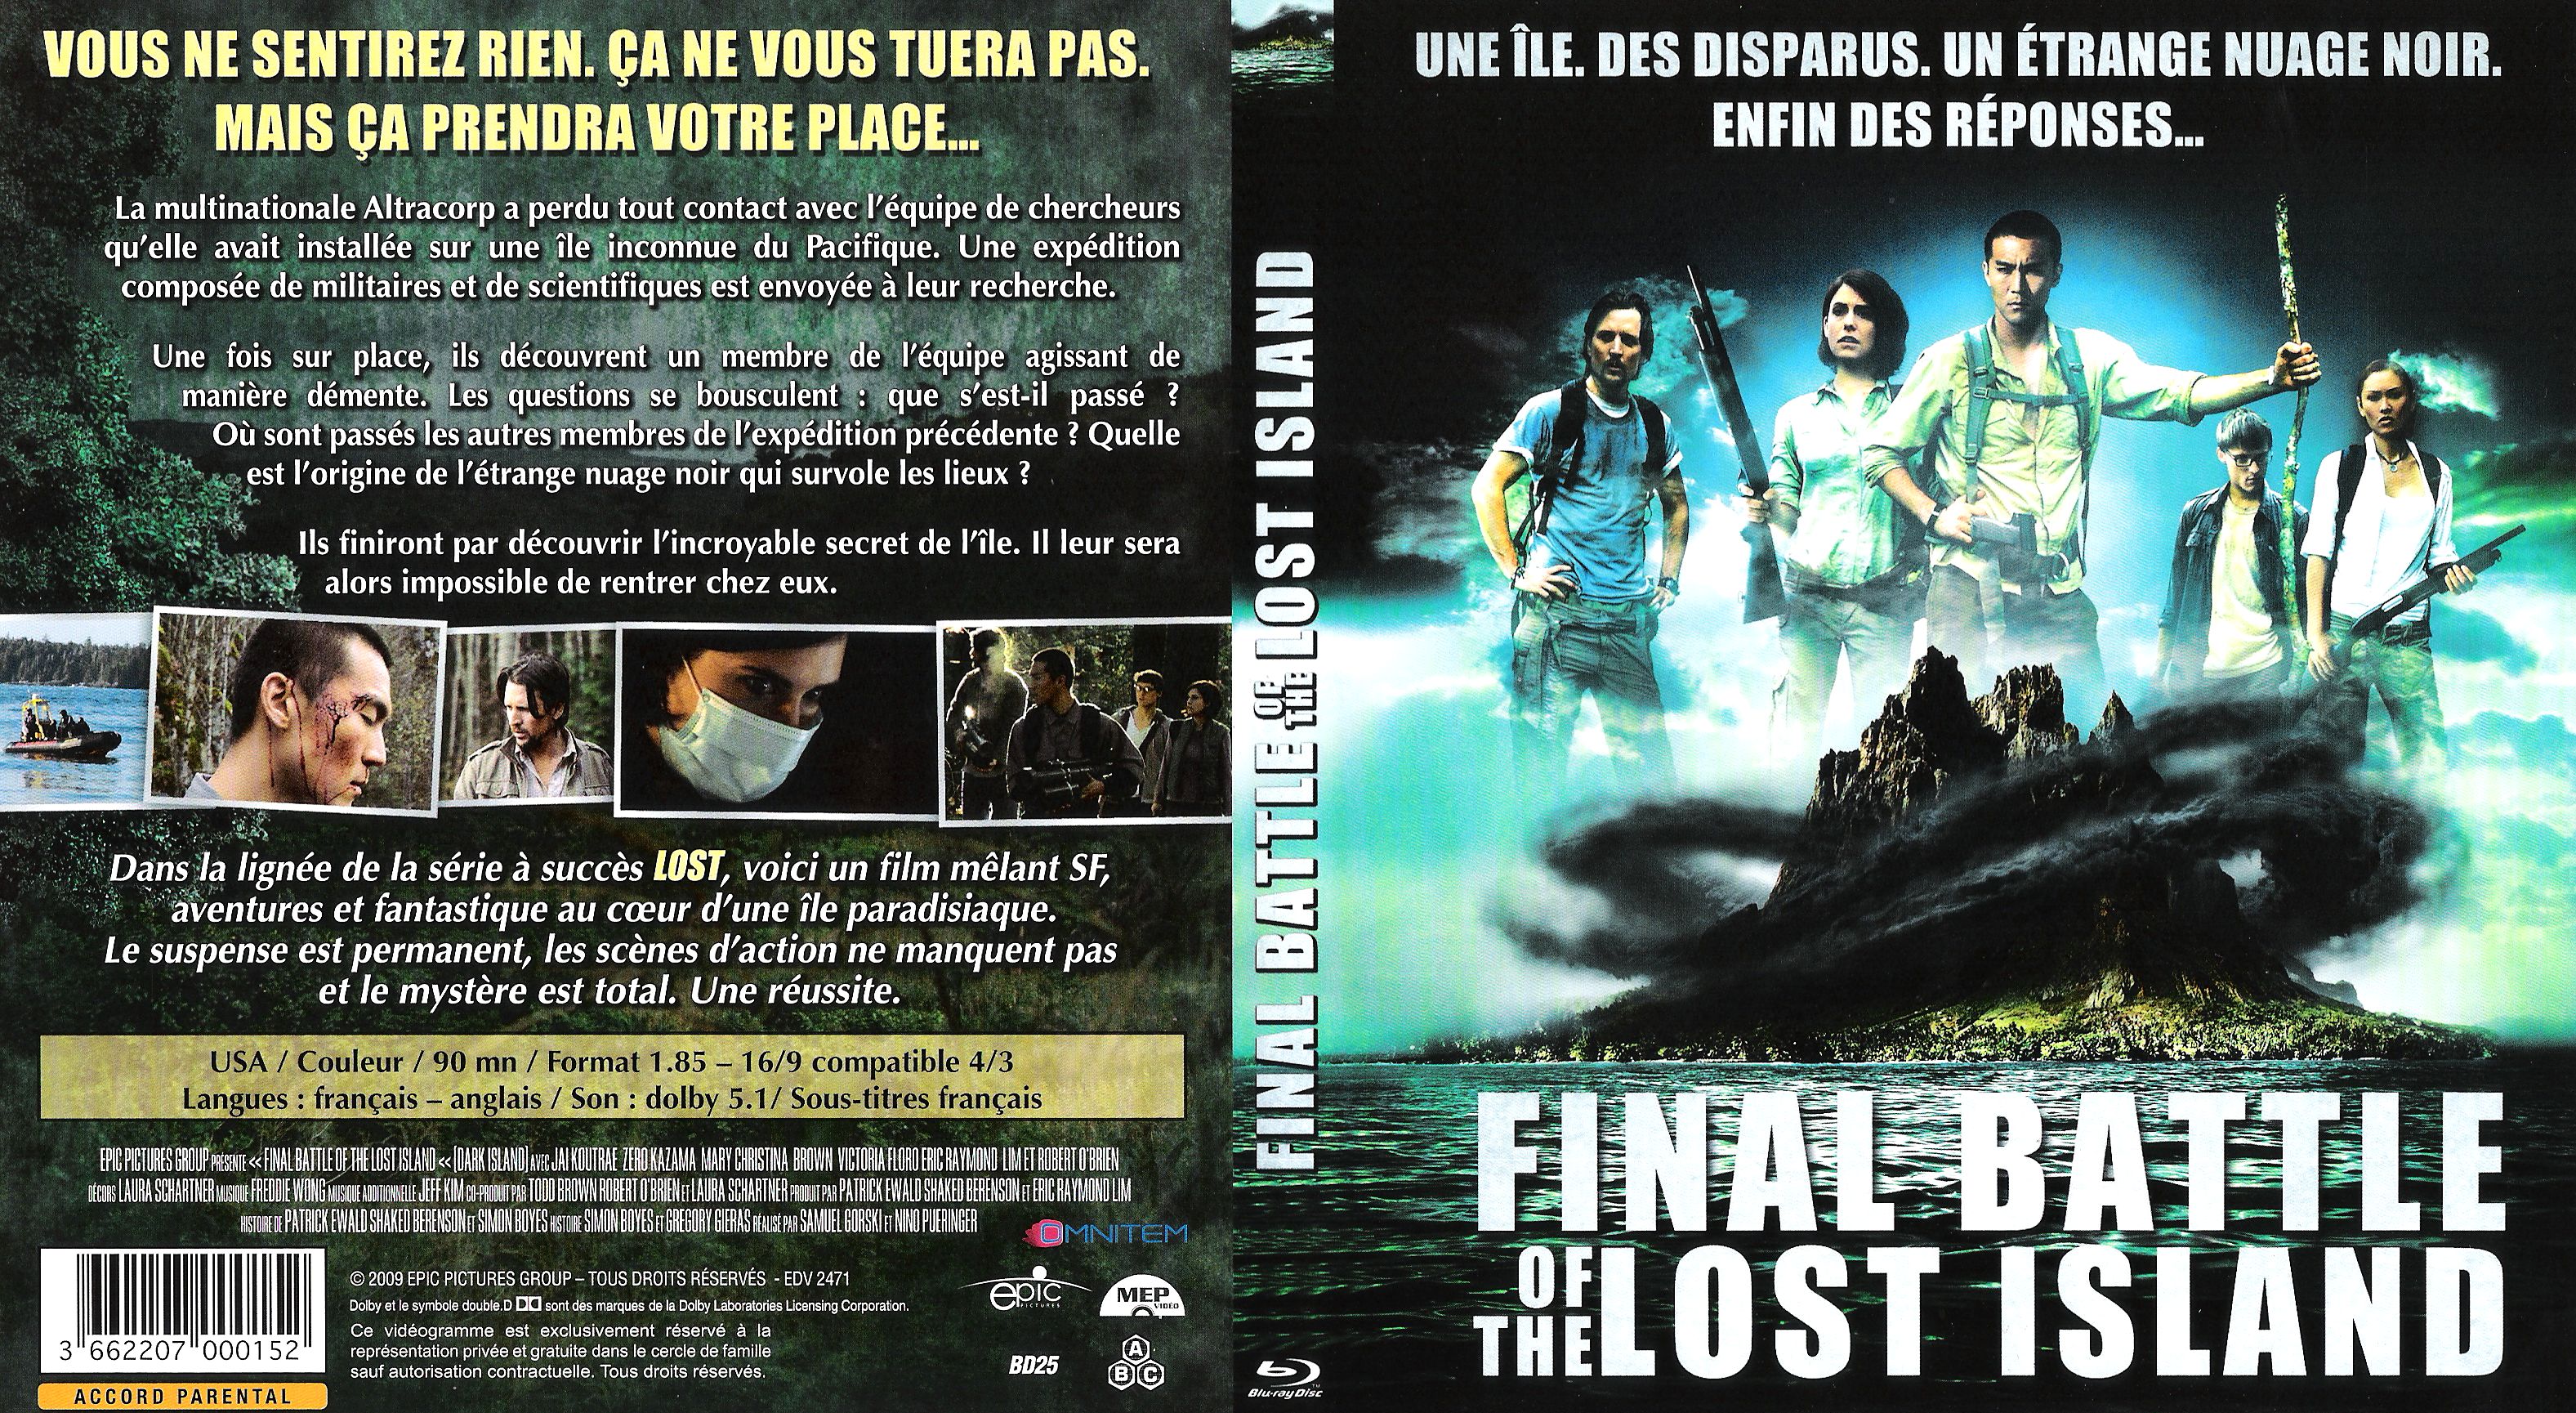 Jaquette DVD Final battle of the lost island (BLU-RAY)